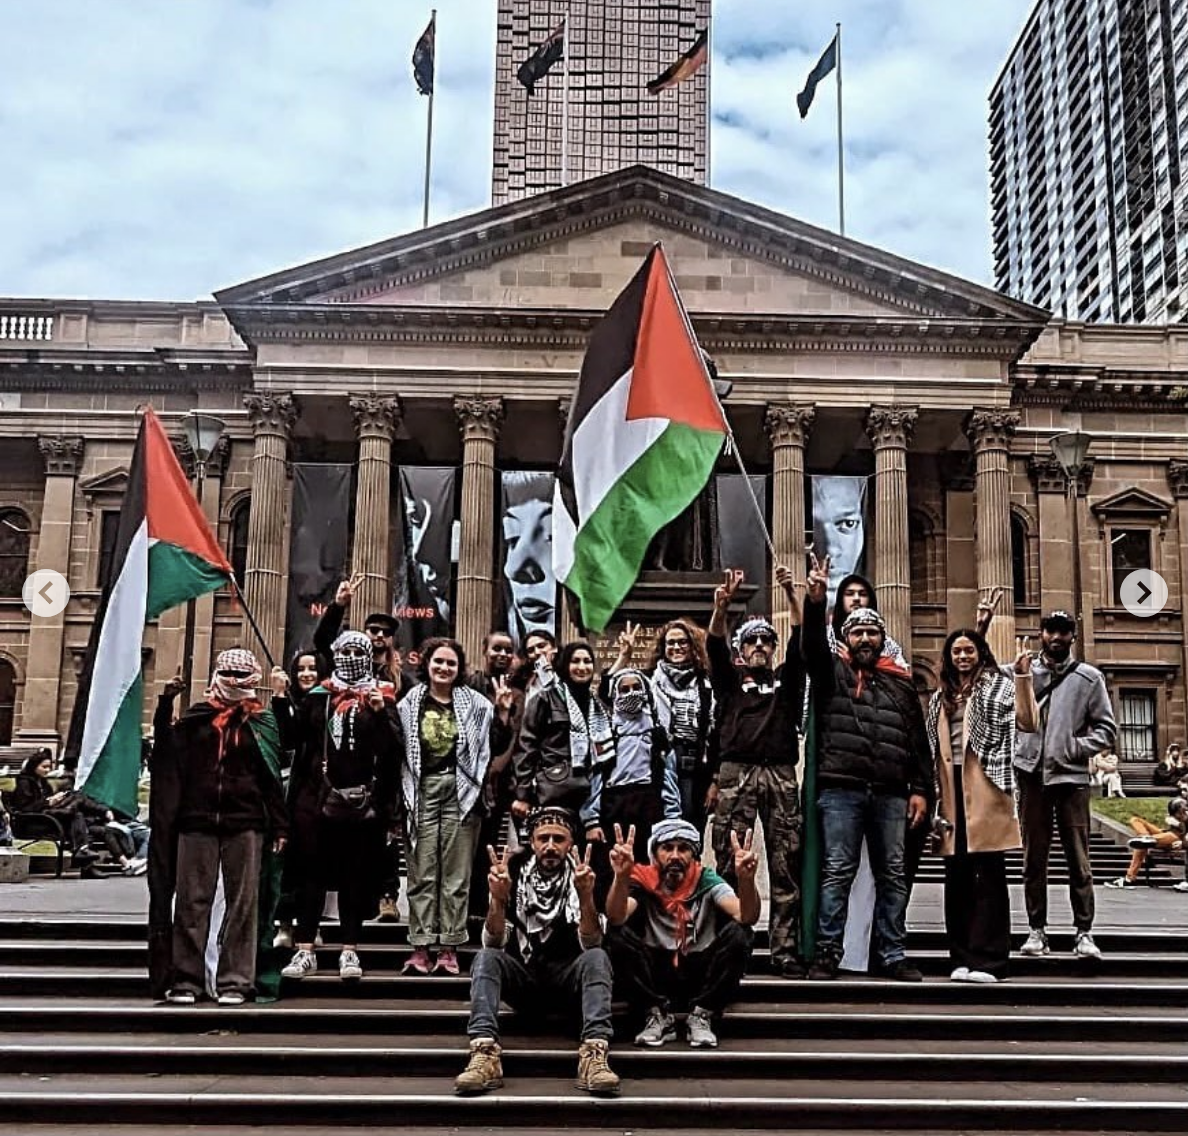 The Sit-Intifada at Parliament steps in Naarm. Image: @thesitintifada